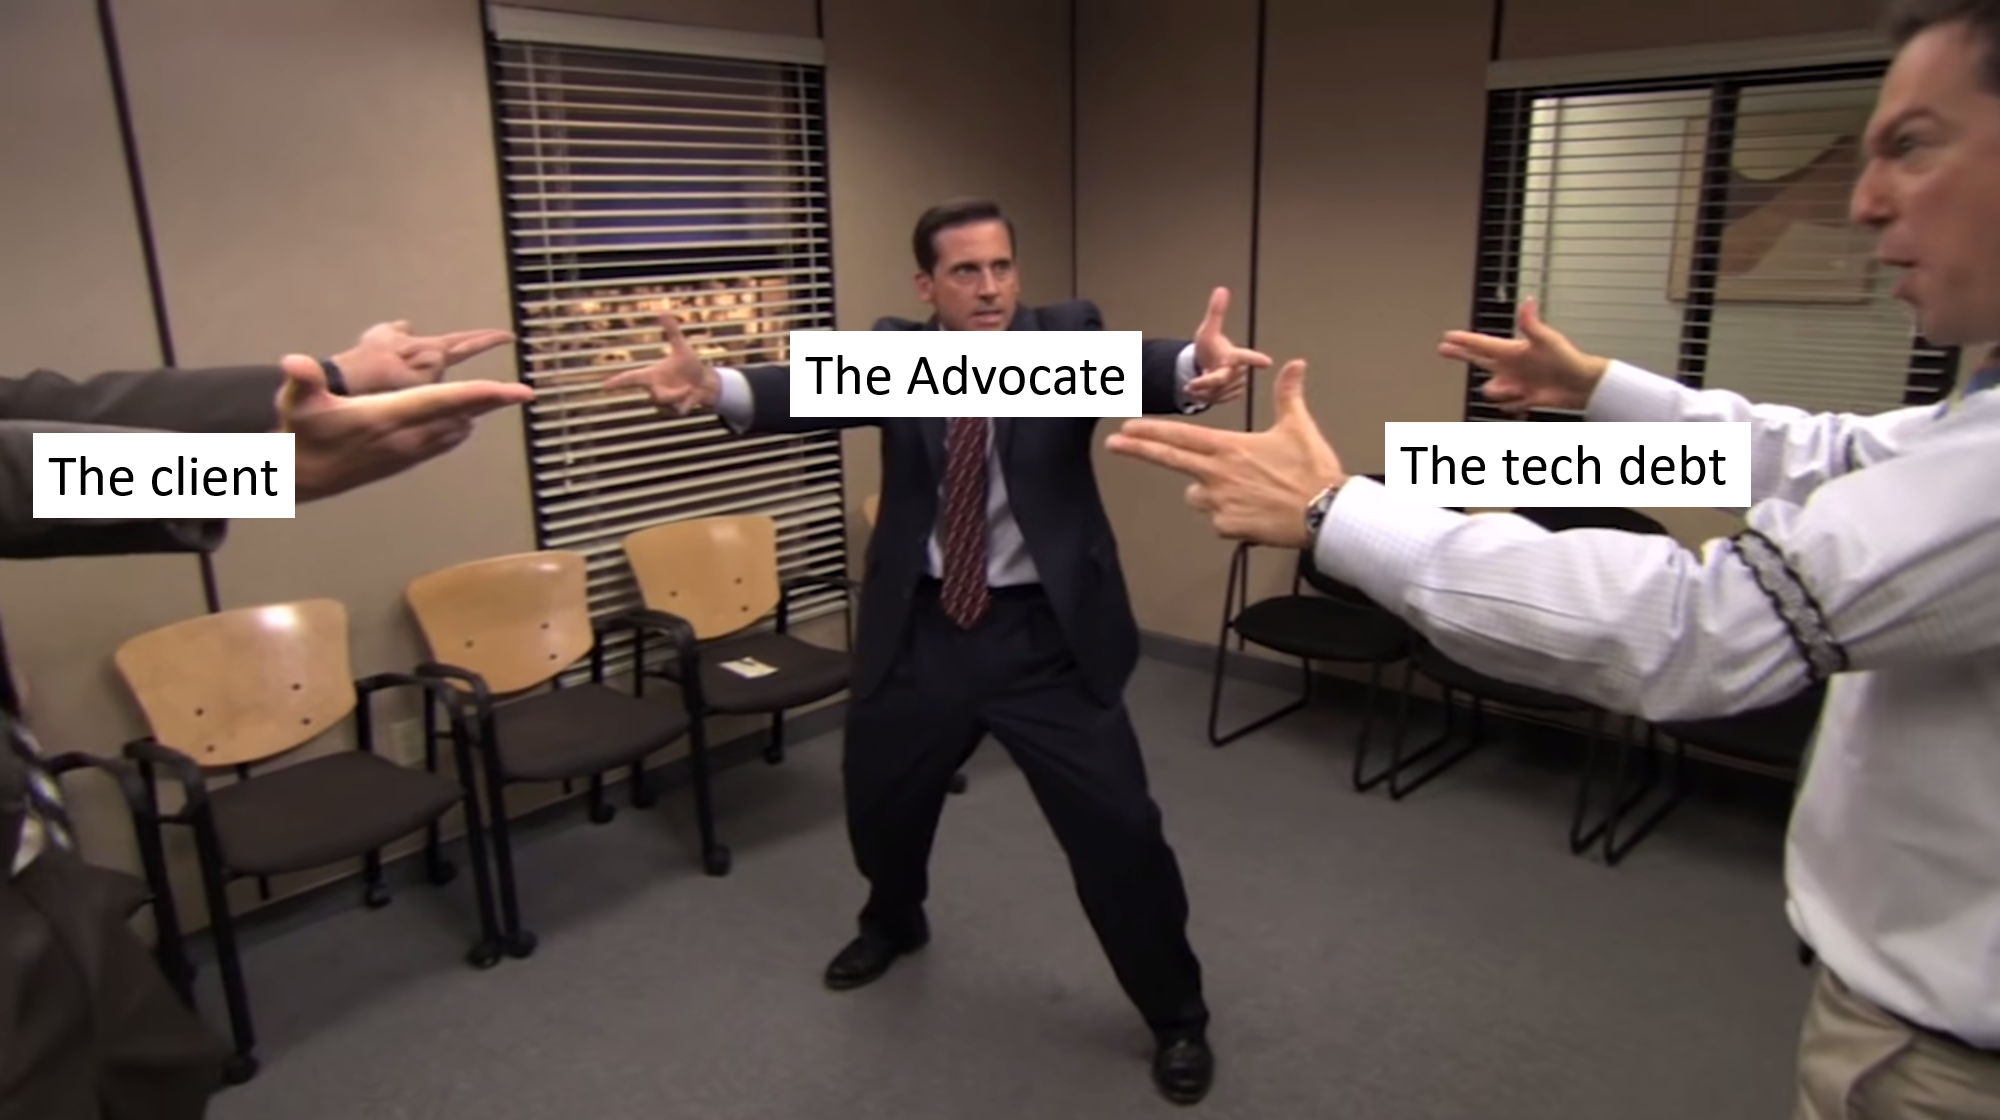 Edit from the Office with a stand off between The client, The advocate, and the tech debt.